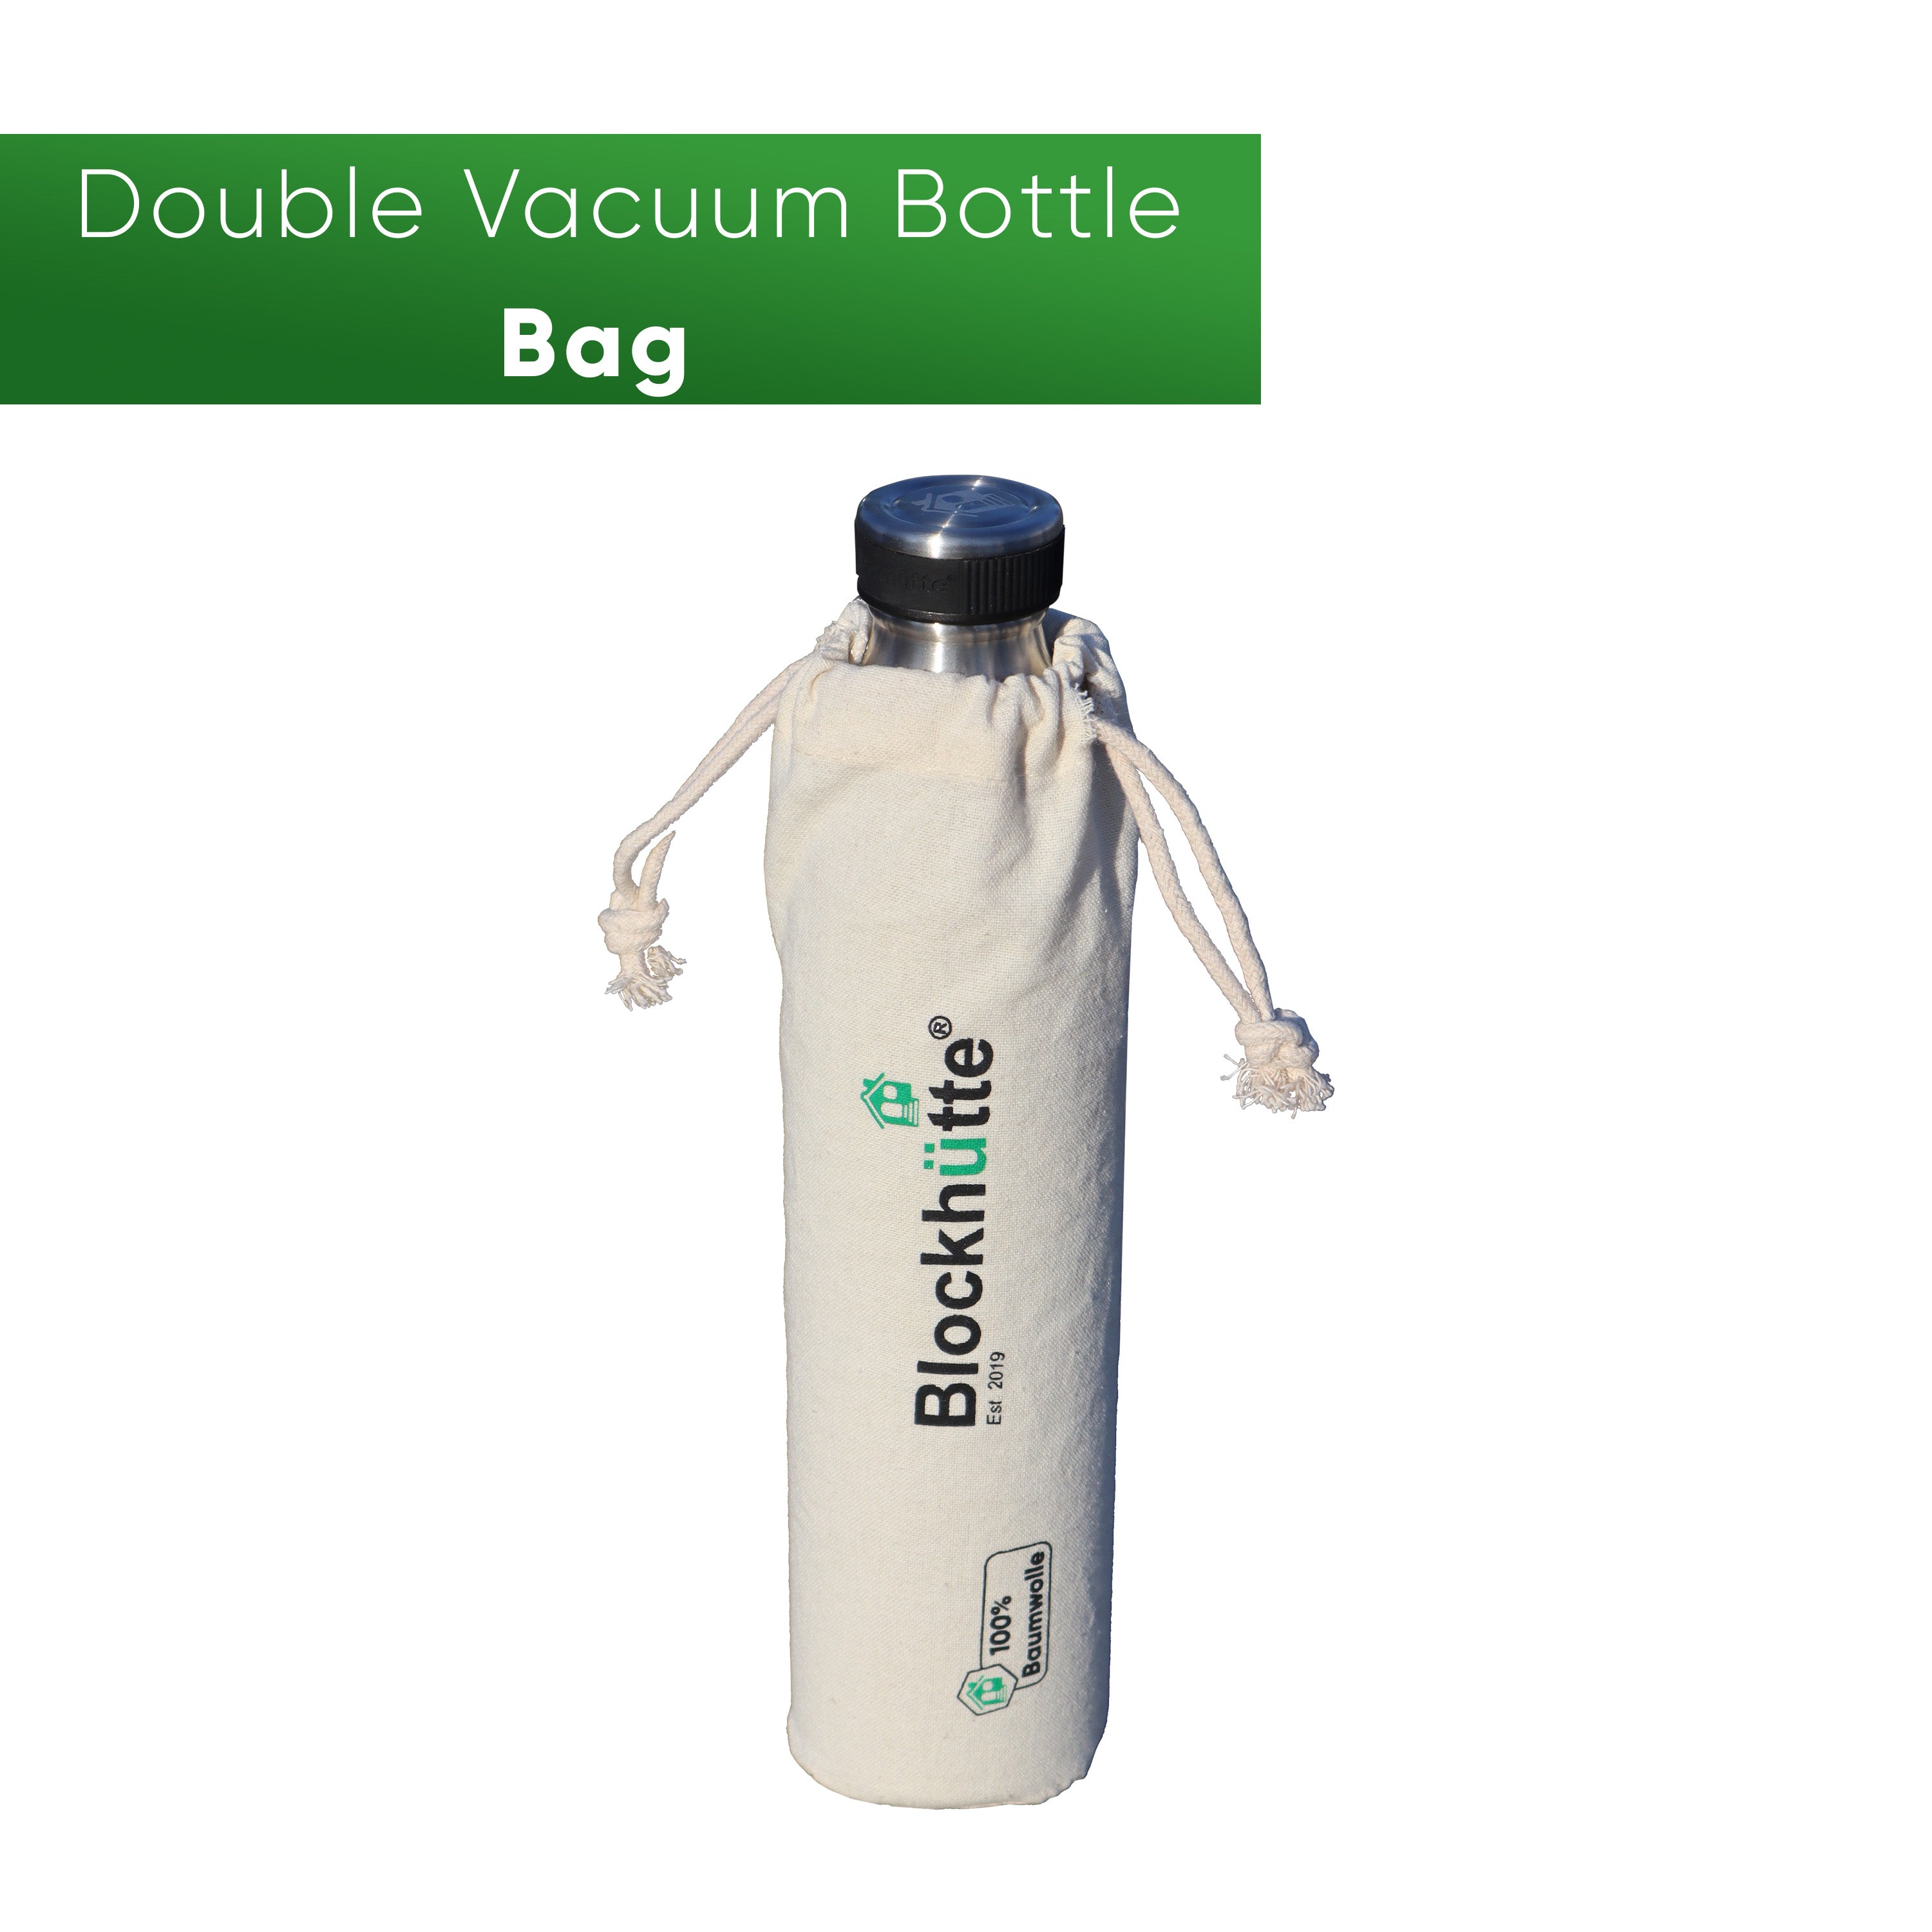 Double Vacuum Insulated Water Bottle - Bag